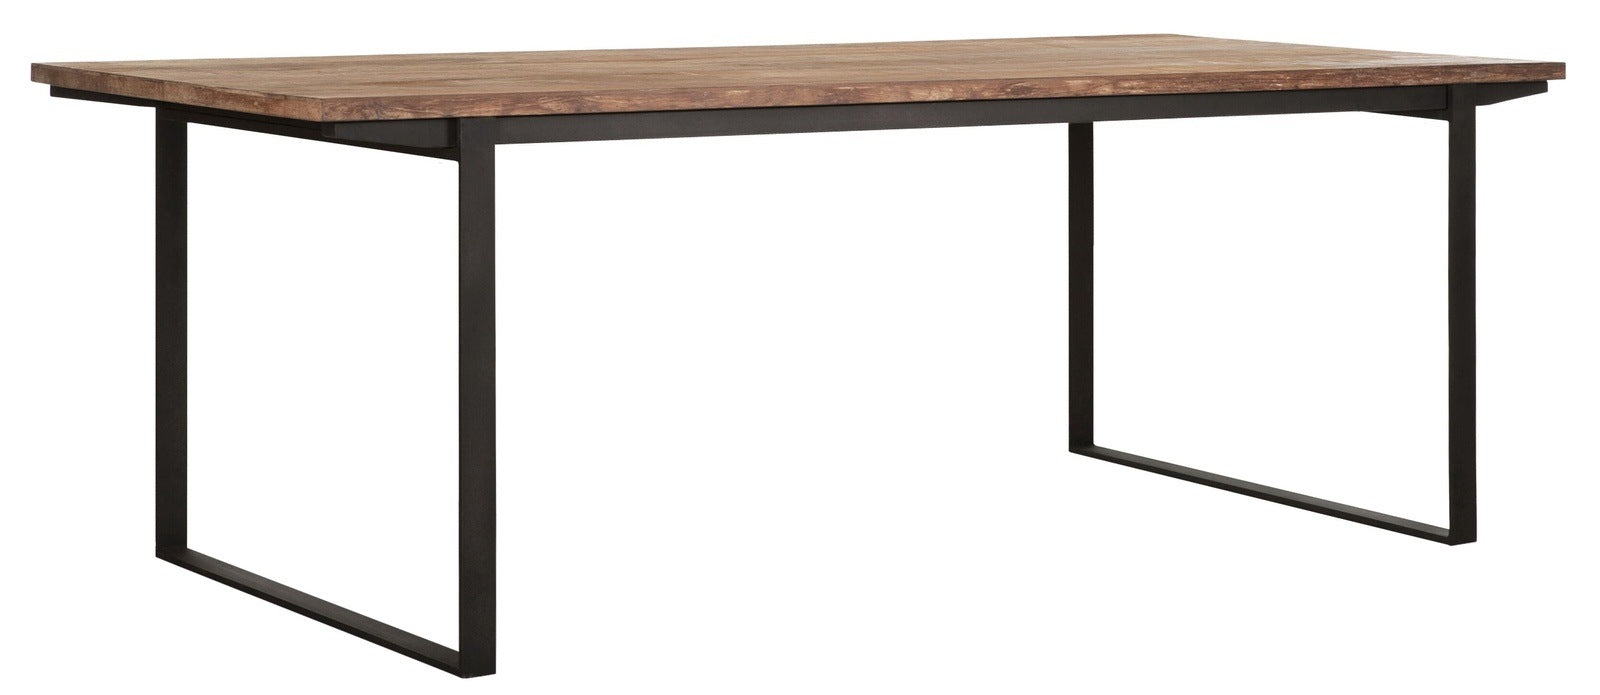 Dtp Home Odeon Rectangular Dining Table In Recycled Teakwood Finish Small